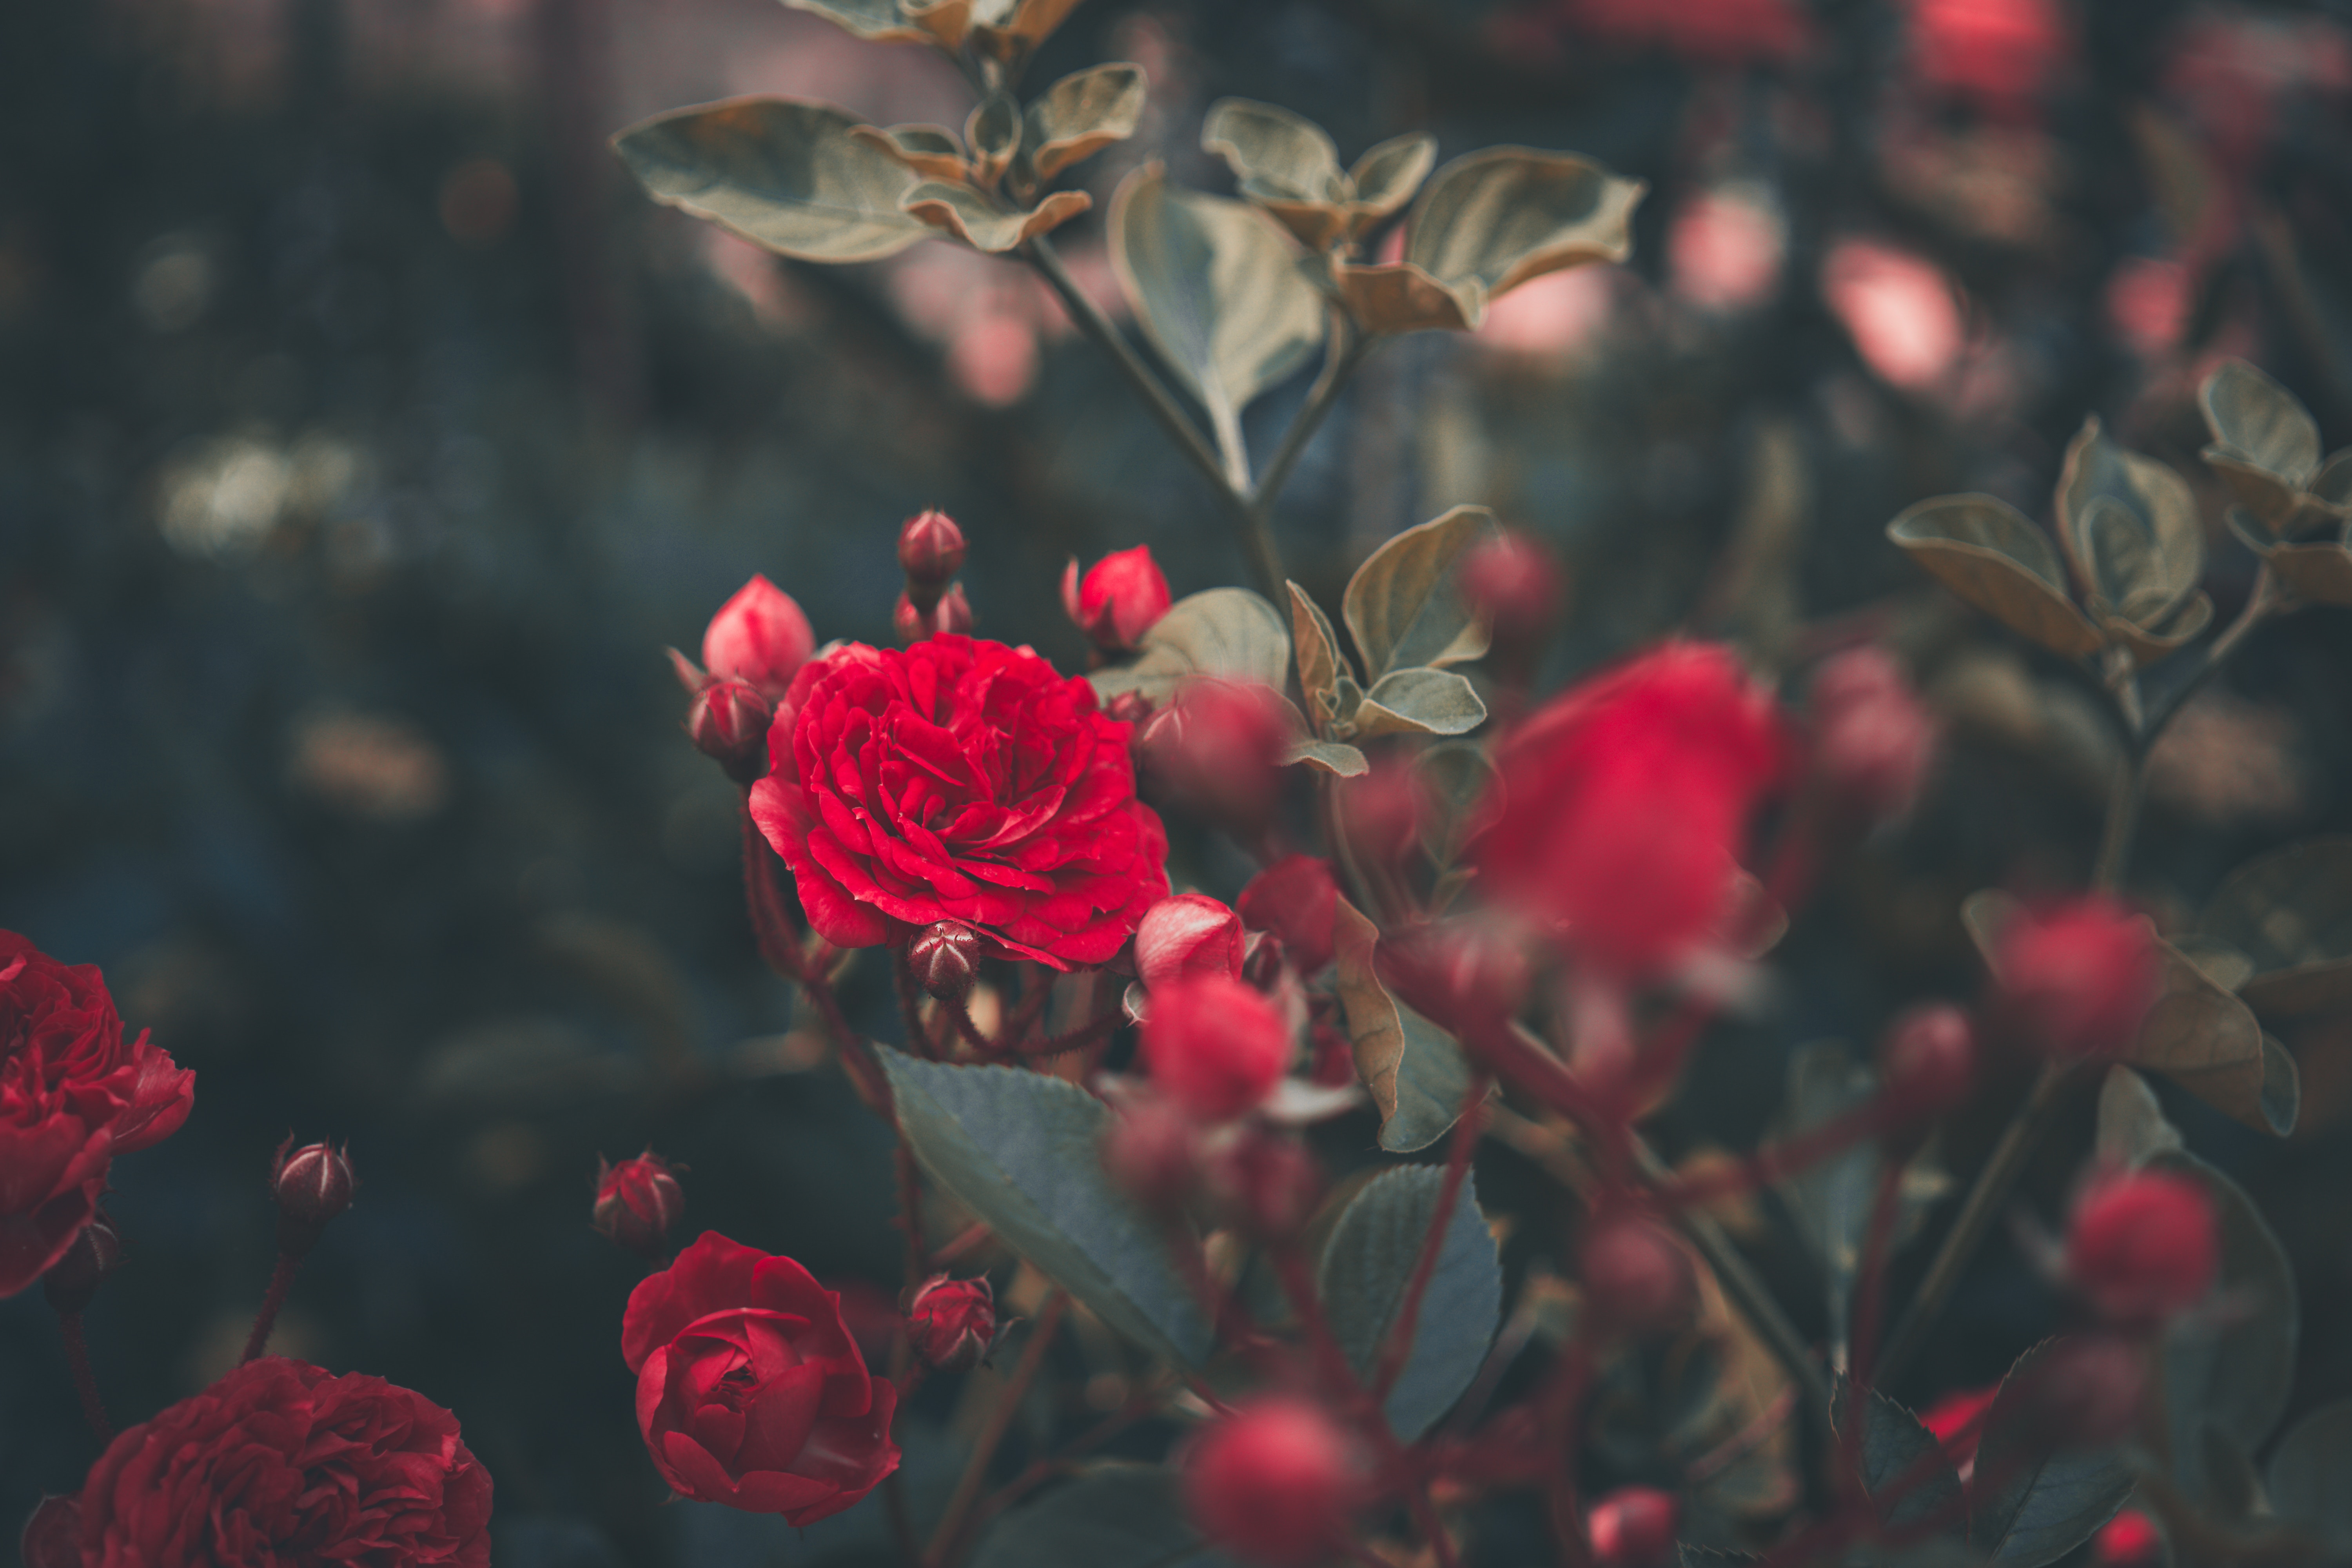 72342 download wallpaper flowers, bush, red, rose flower, rose, bud, garden screensavers and pictures for free